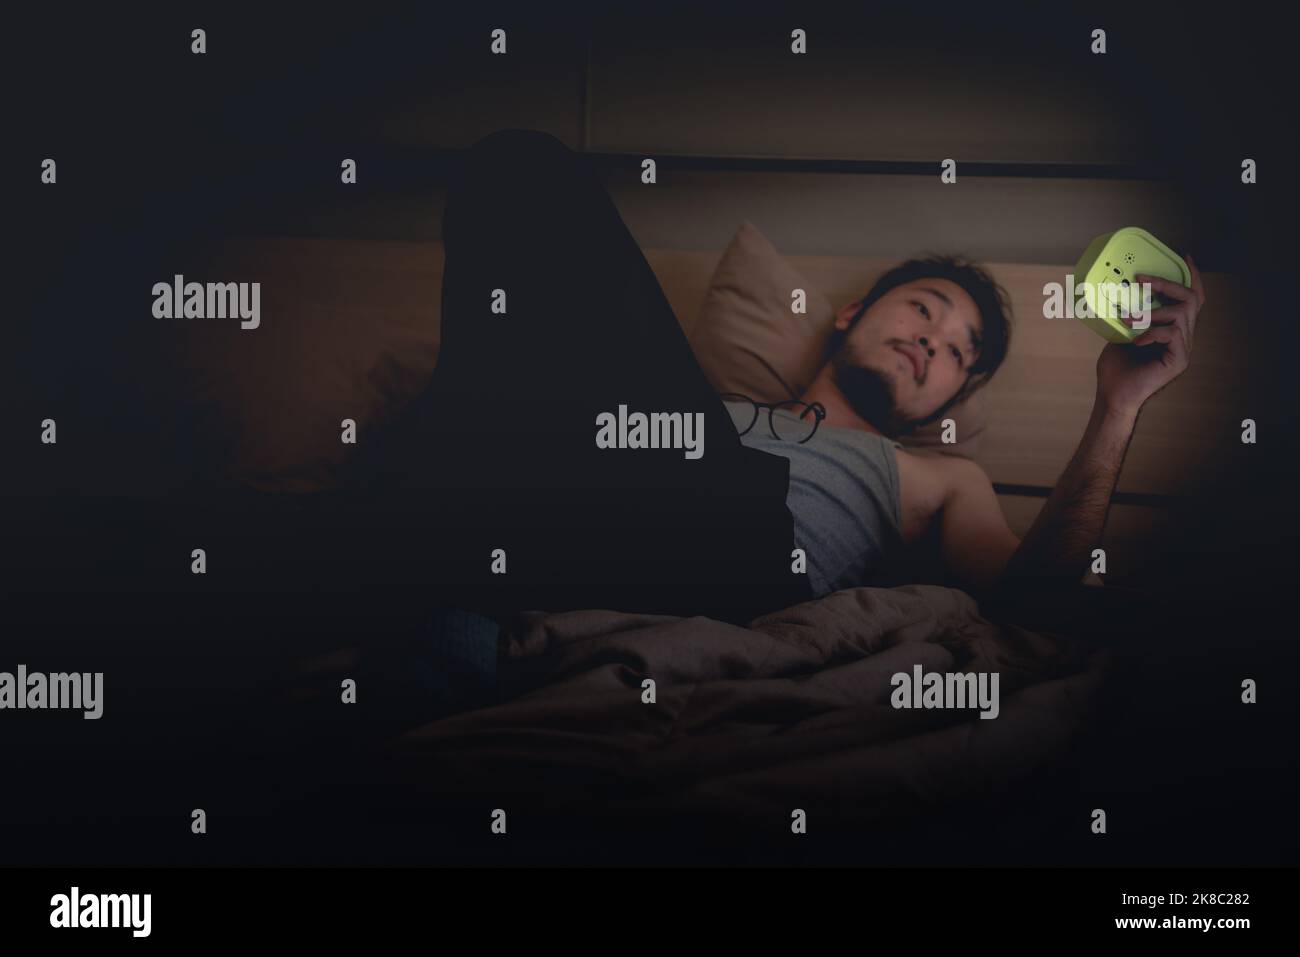 Can't sleep at nighttime concept, Asian young Man holding and looking at Alarm Clock at night on the bed. Stock Photo